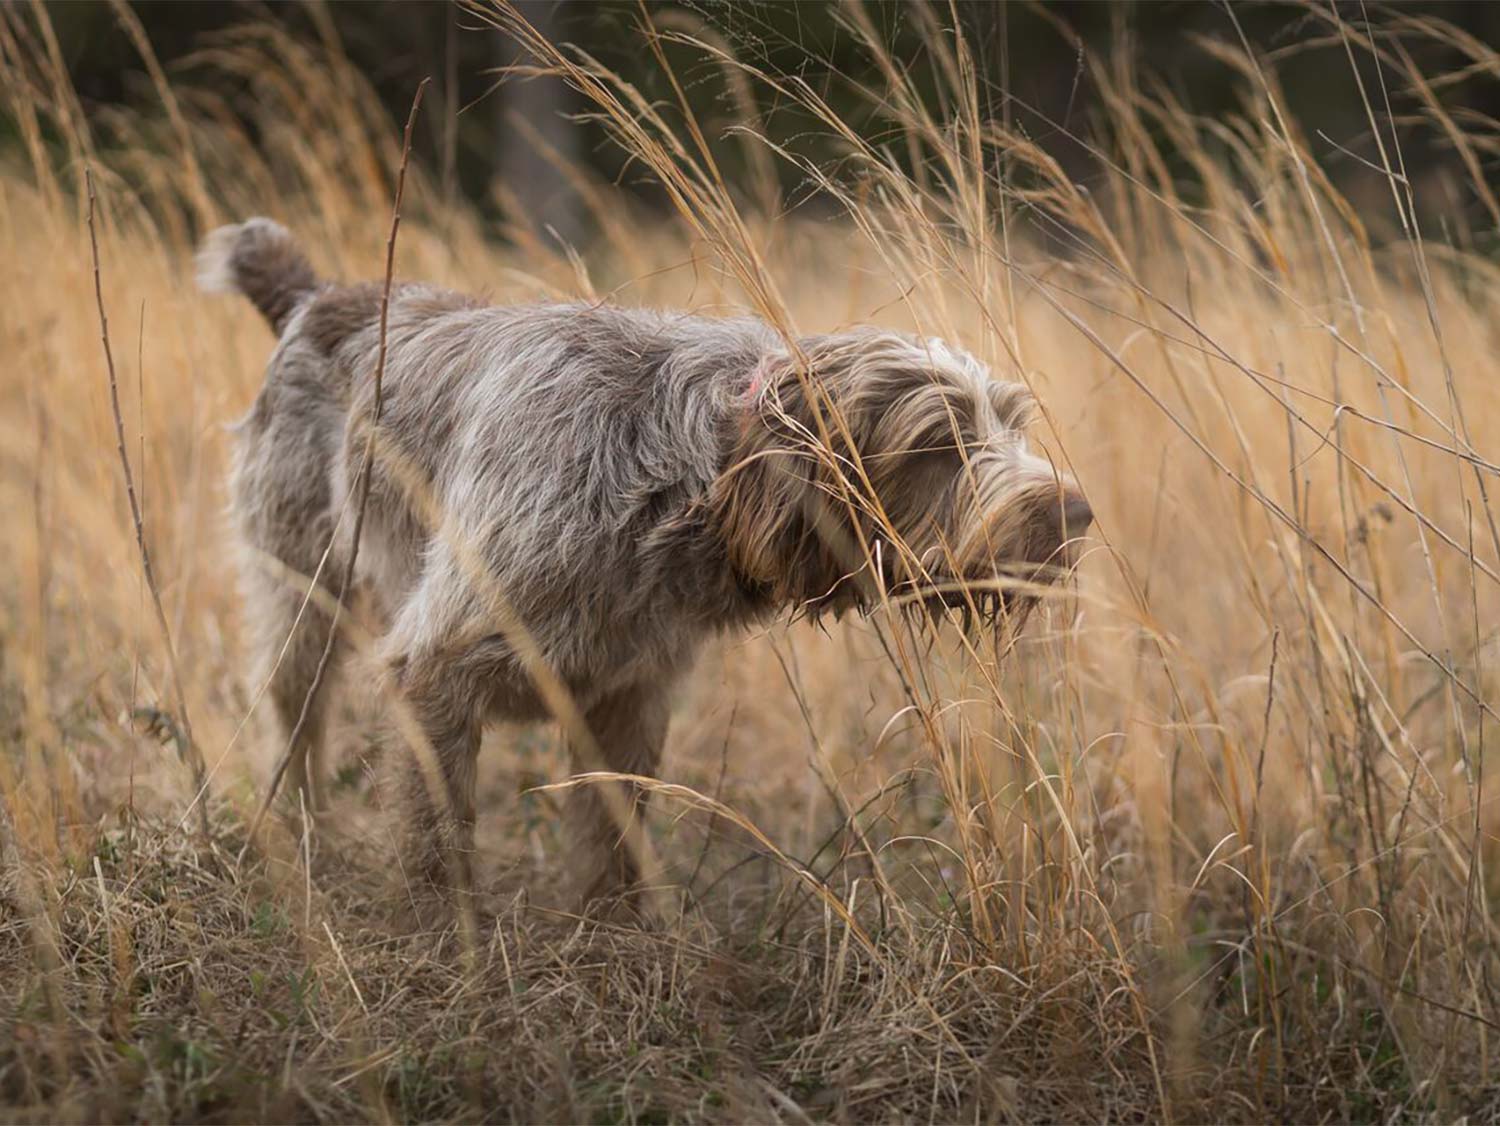 A solo hunting dog in a field of tall grass.